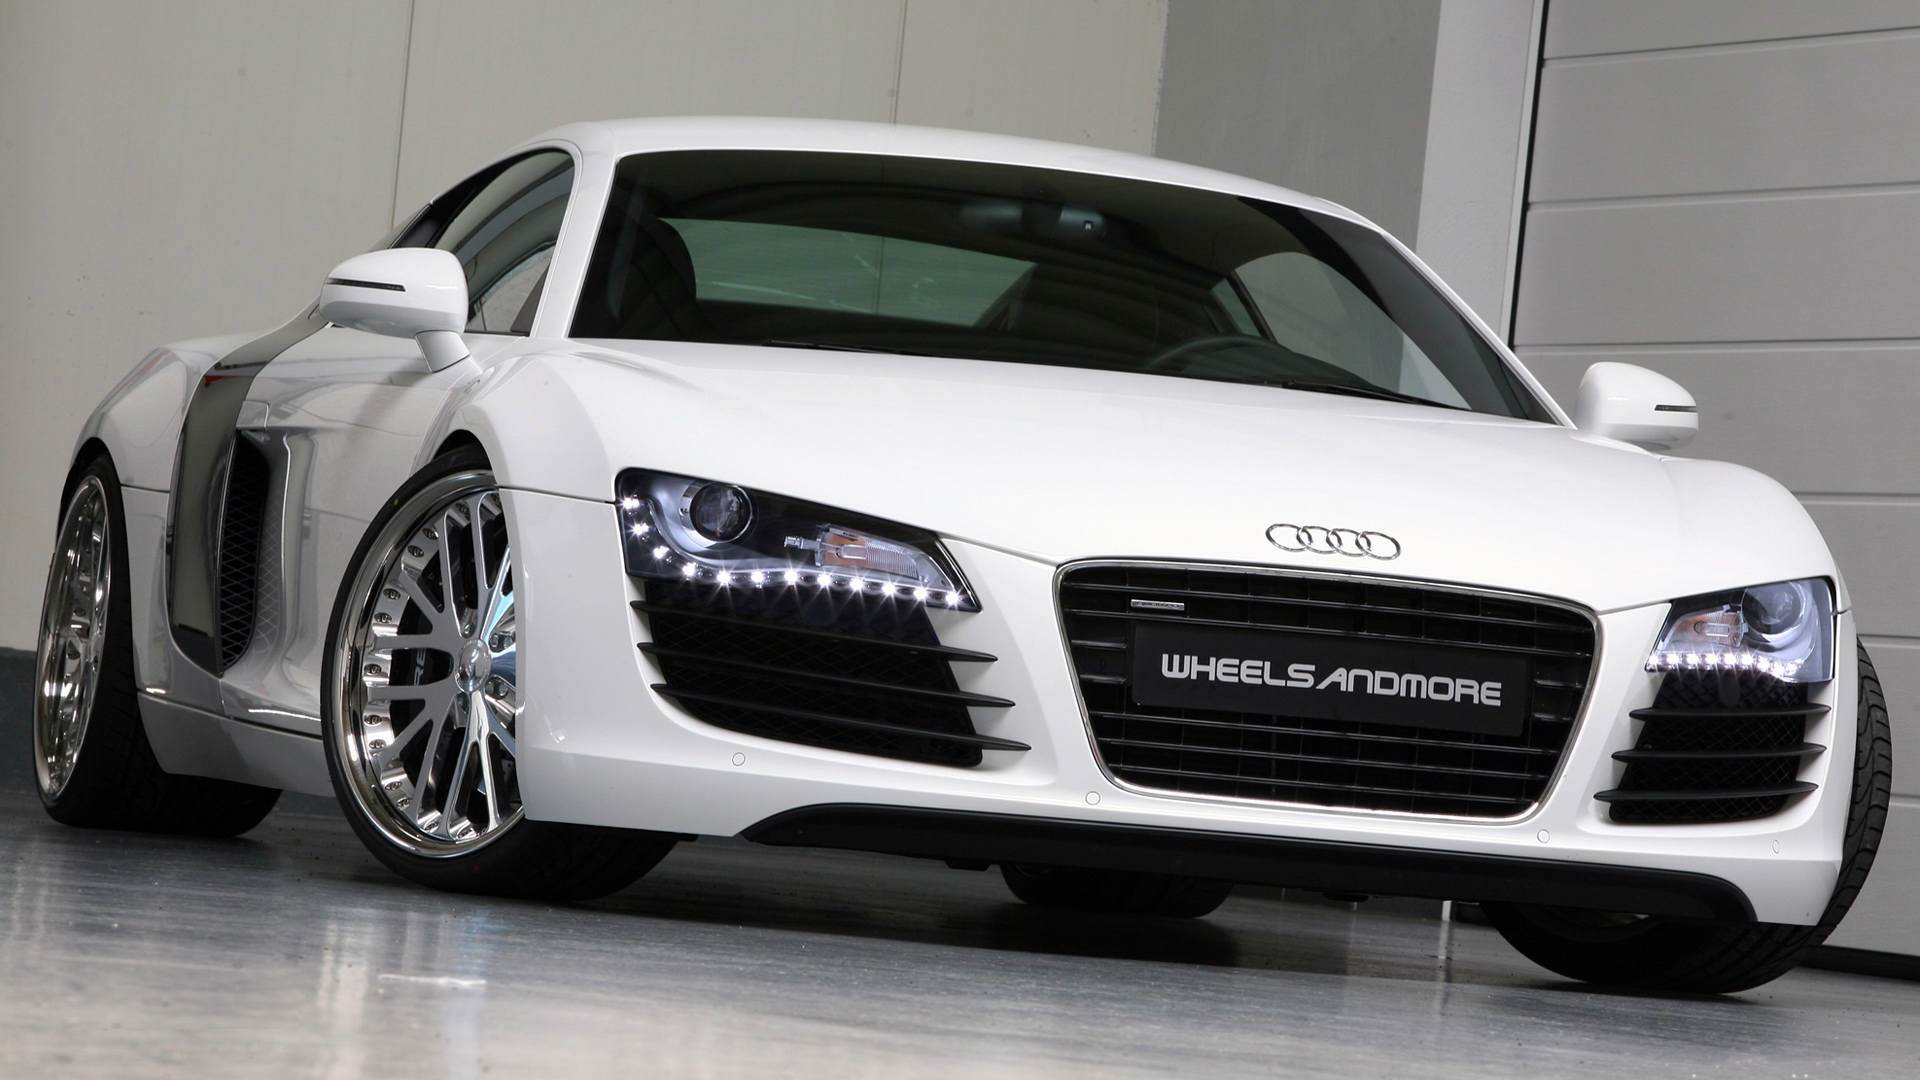 Free download audi cars hd wallpapers x for your desktop mobile tablet explore audi wallpapers hd audi wallpapers audi wallpaper hd audi a wallpaper